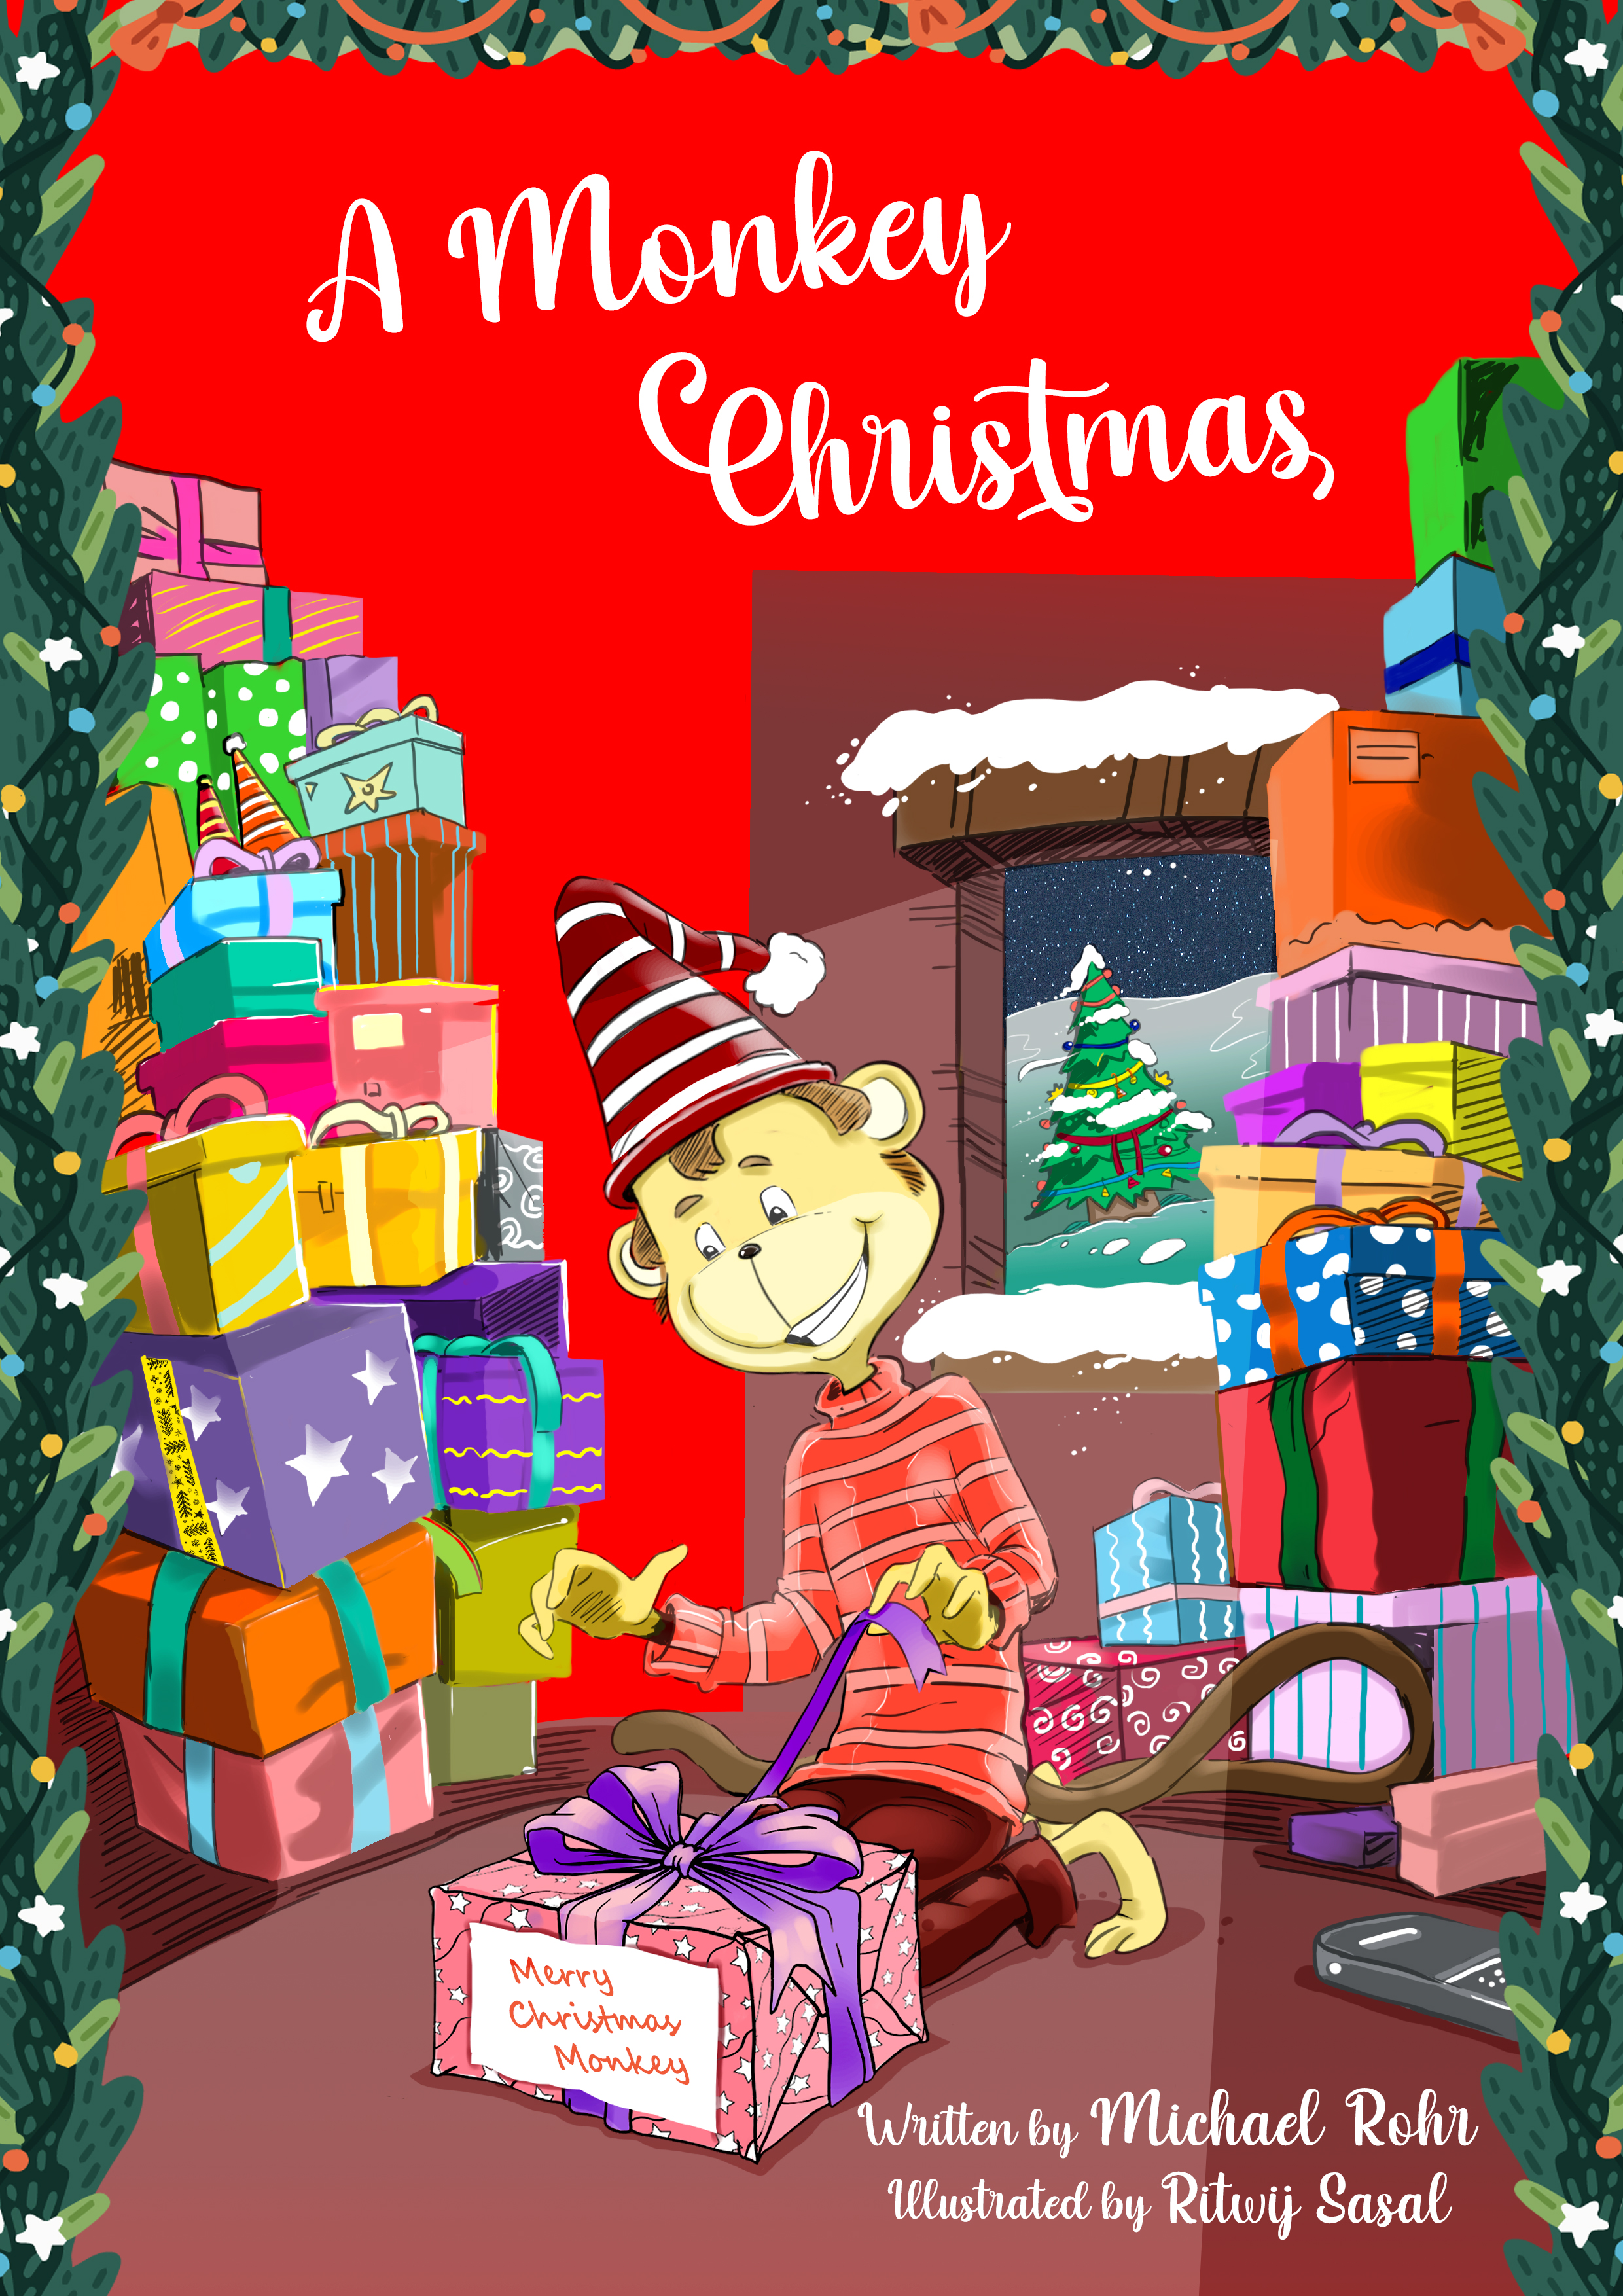 A Monkey Christmas: The fun-filled illustrated kids’ book delighting youngsters this festive season